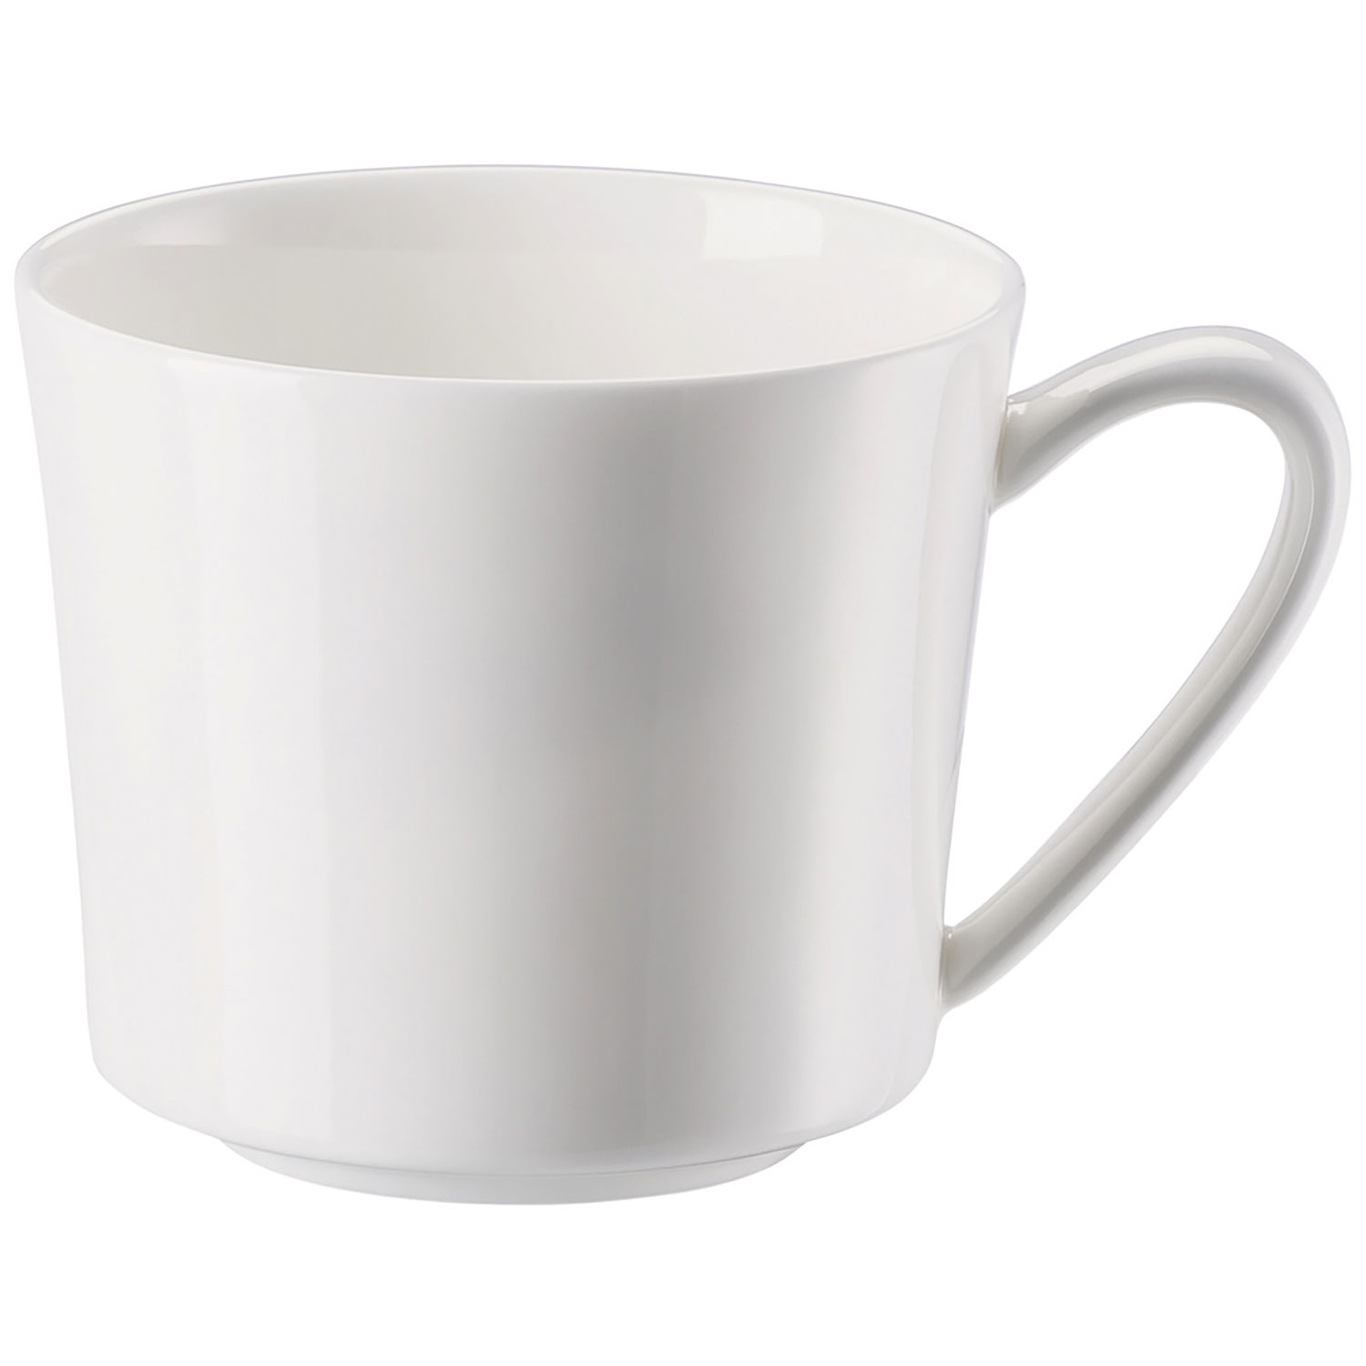 Jade Cup, White